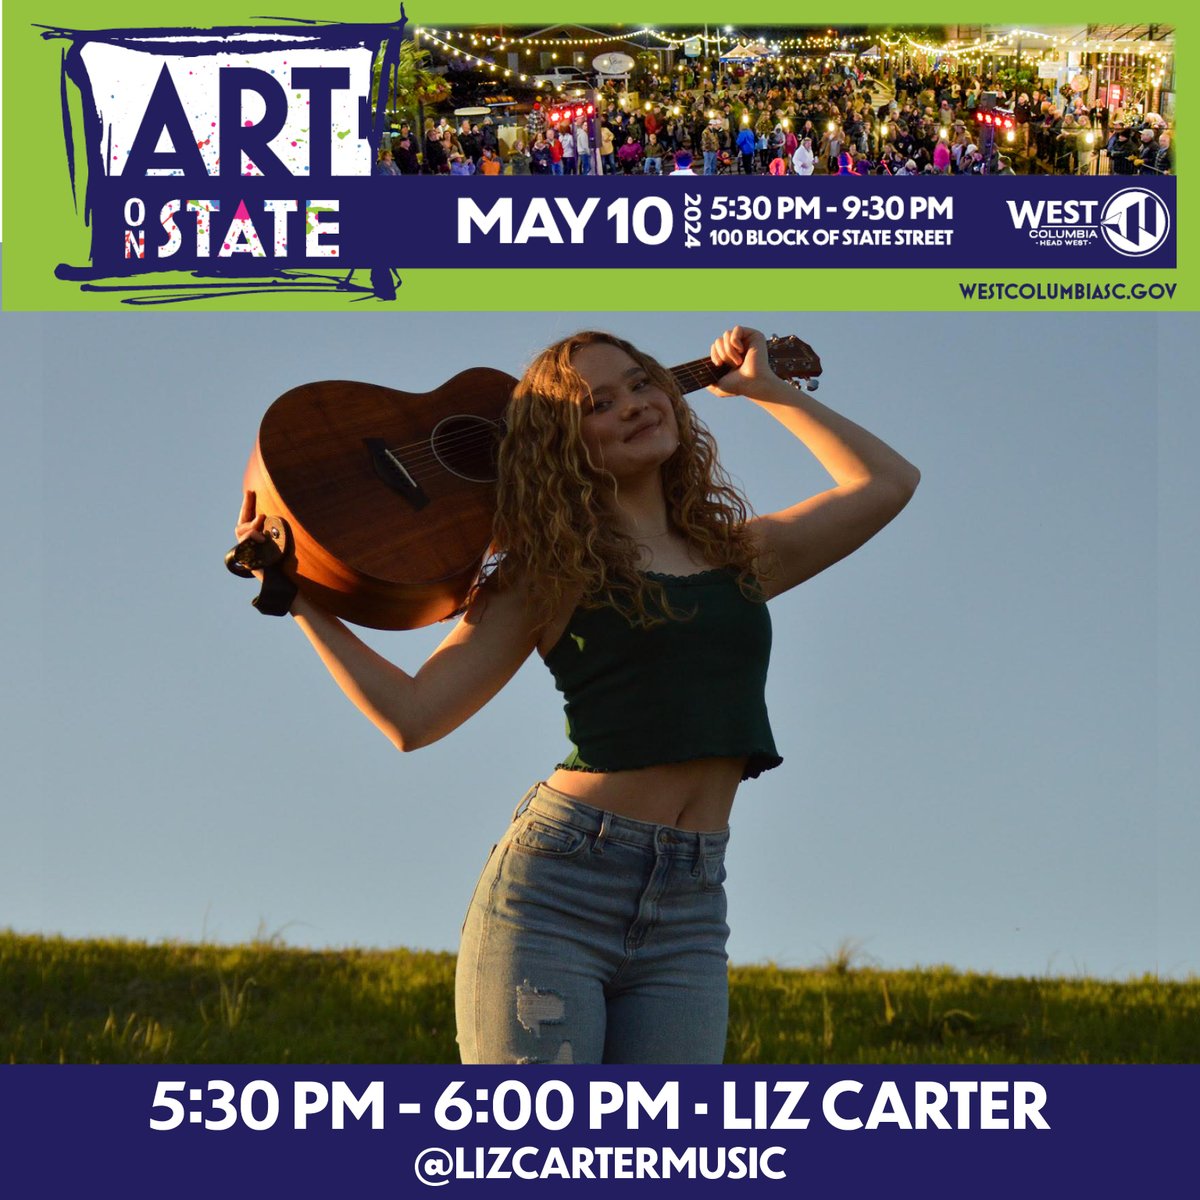 🔦Lineup spotlight!🔦 The 6th Annual Art on State has three AMAZING sets playing throughout the evening. 🎶 Lucky Pocket Band: 7:30 PM - 9:30 PM 🎸 Civil Remedy: 6:15 PM - 7:15 PM 🎤 Liz Carter: 5:30 PM - 6:00 PM ℹ️ facebook.com/events/1484976… 📅 Friday,May 10, 5:30 - 9:30 PM